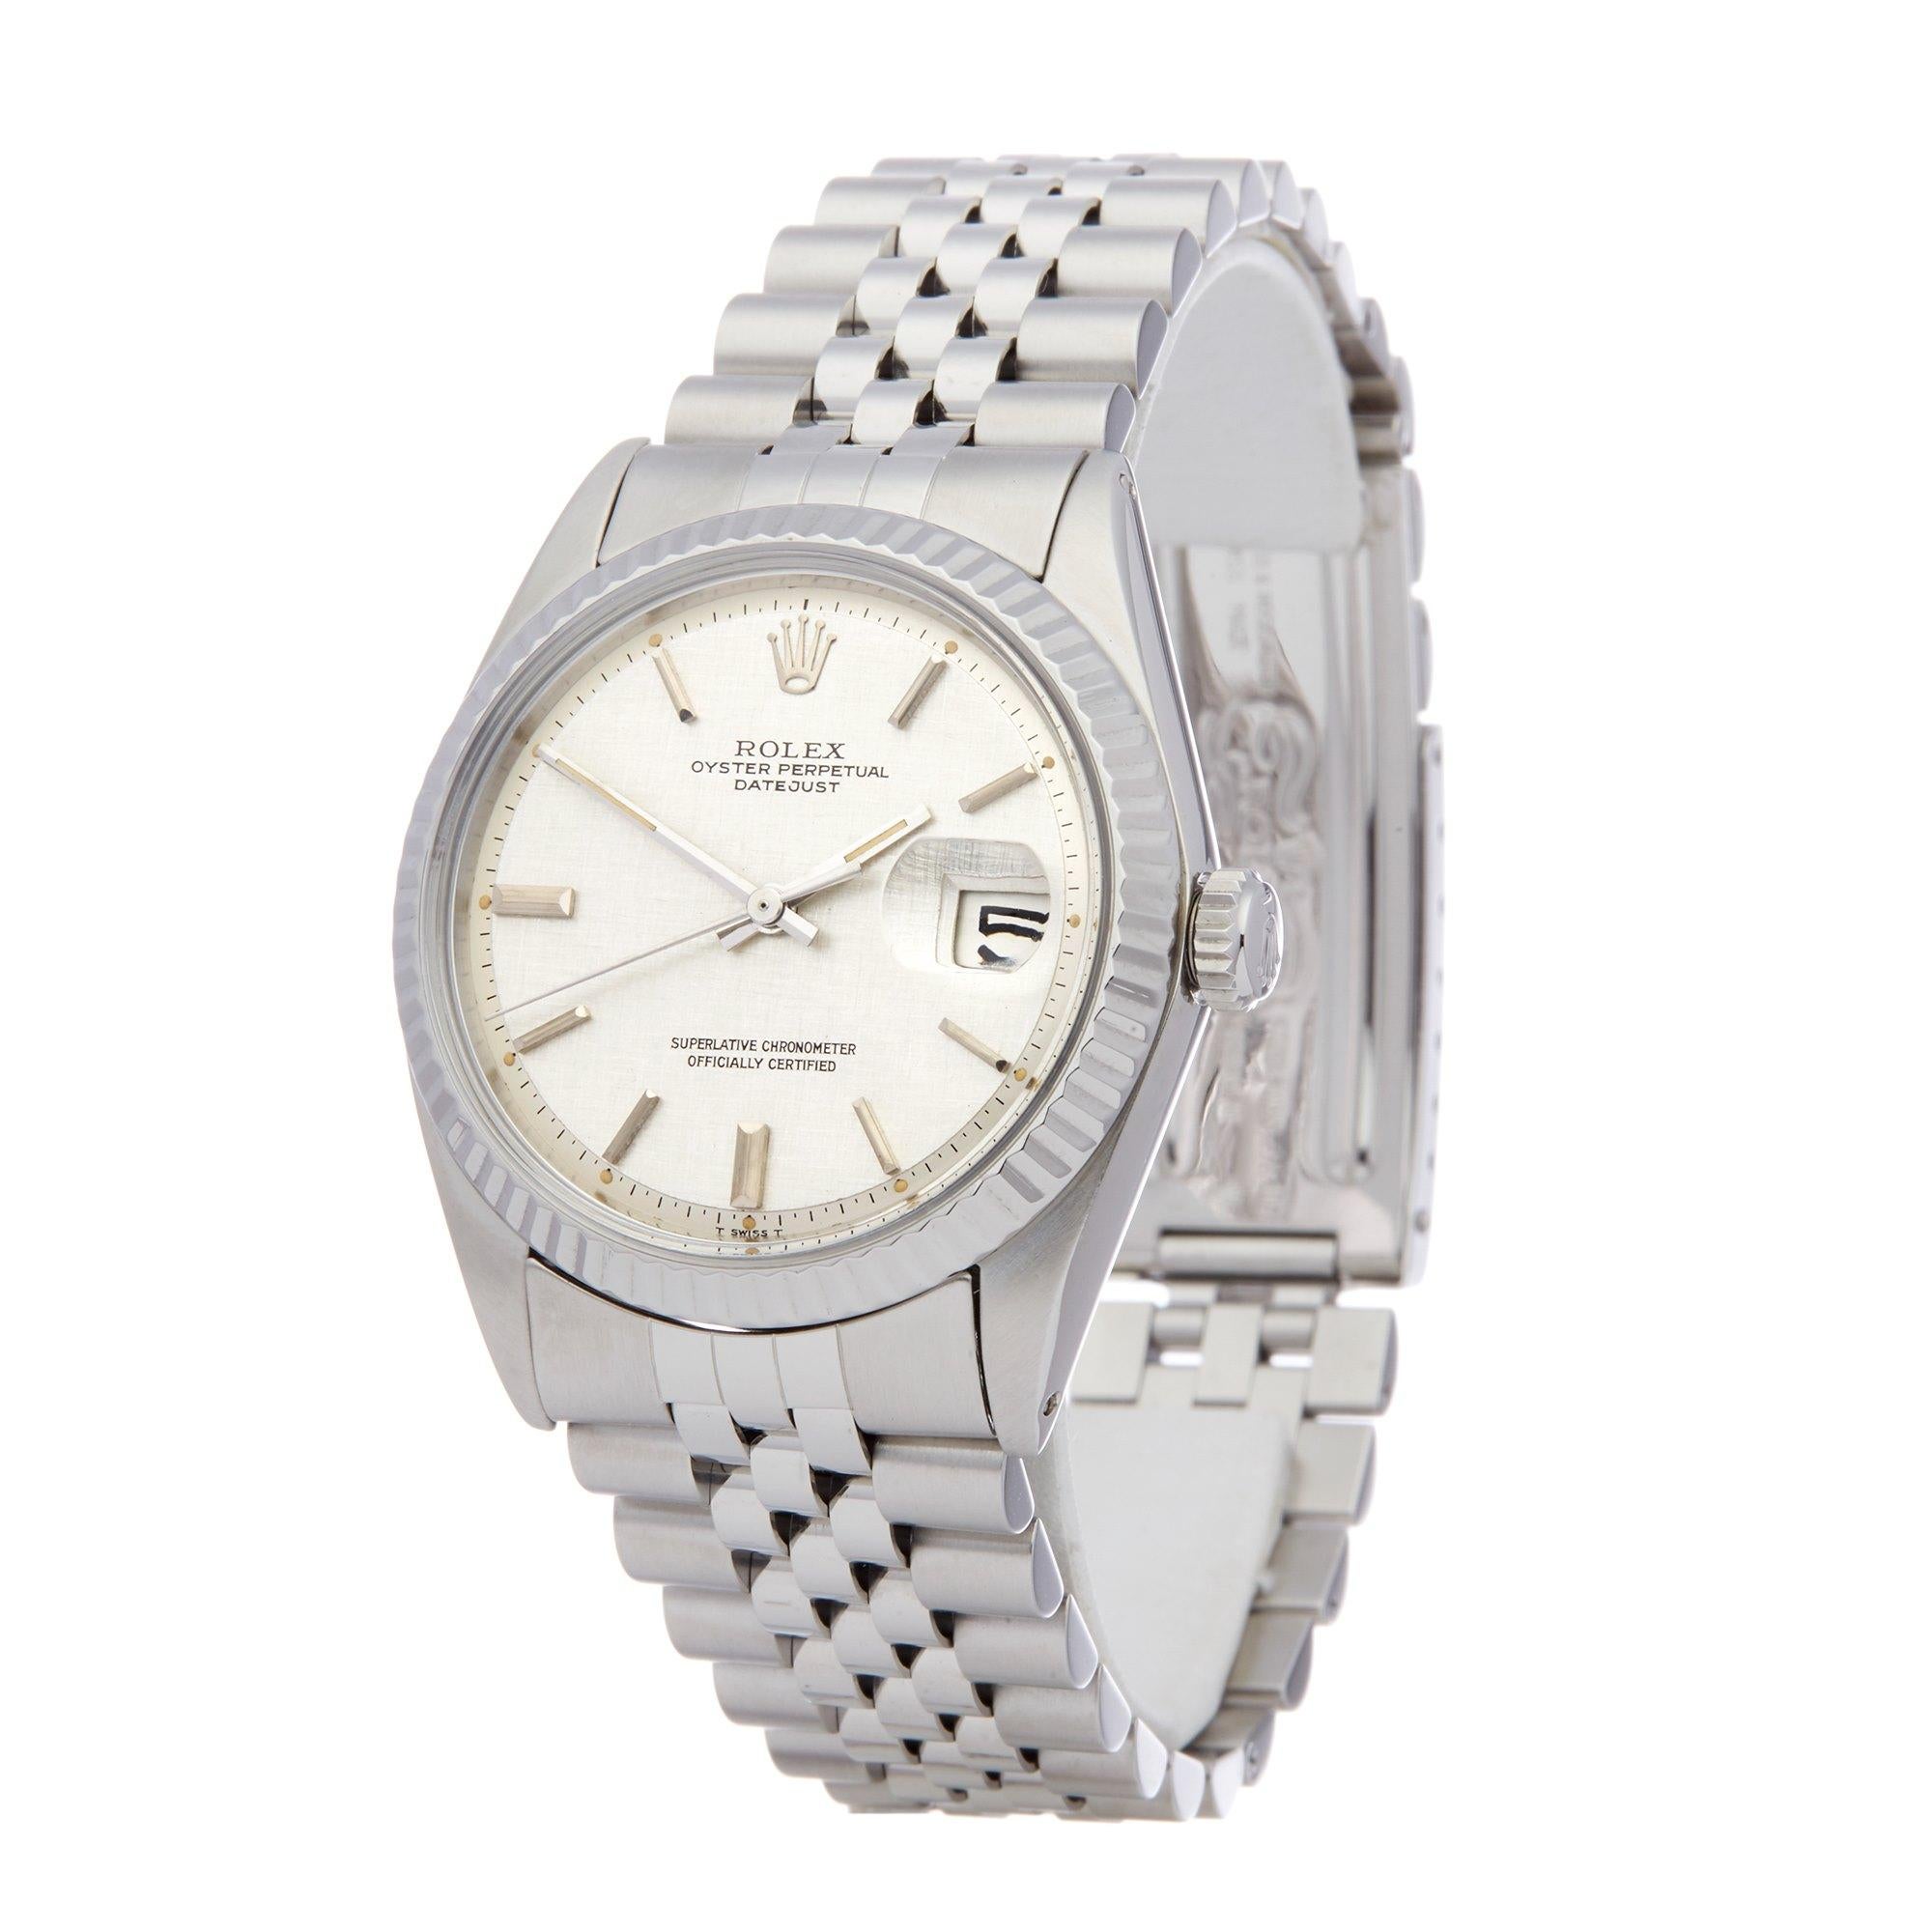 Xupes Reference: W007419
Manufacturer: Rolex
Model: Datejust
Model Variant: 36
Model Number: 1601
Age: 1972
Gender: Men
Complete With: Rolex Box
Dial: Silver Baton
Glass: Sapphire Crystal
Case Size: 36mm
Case Material: Stainless Steel
Strap